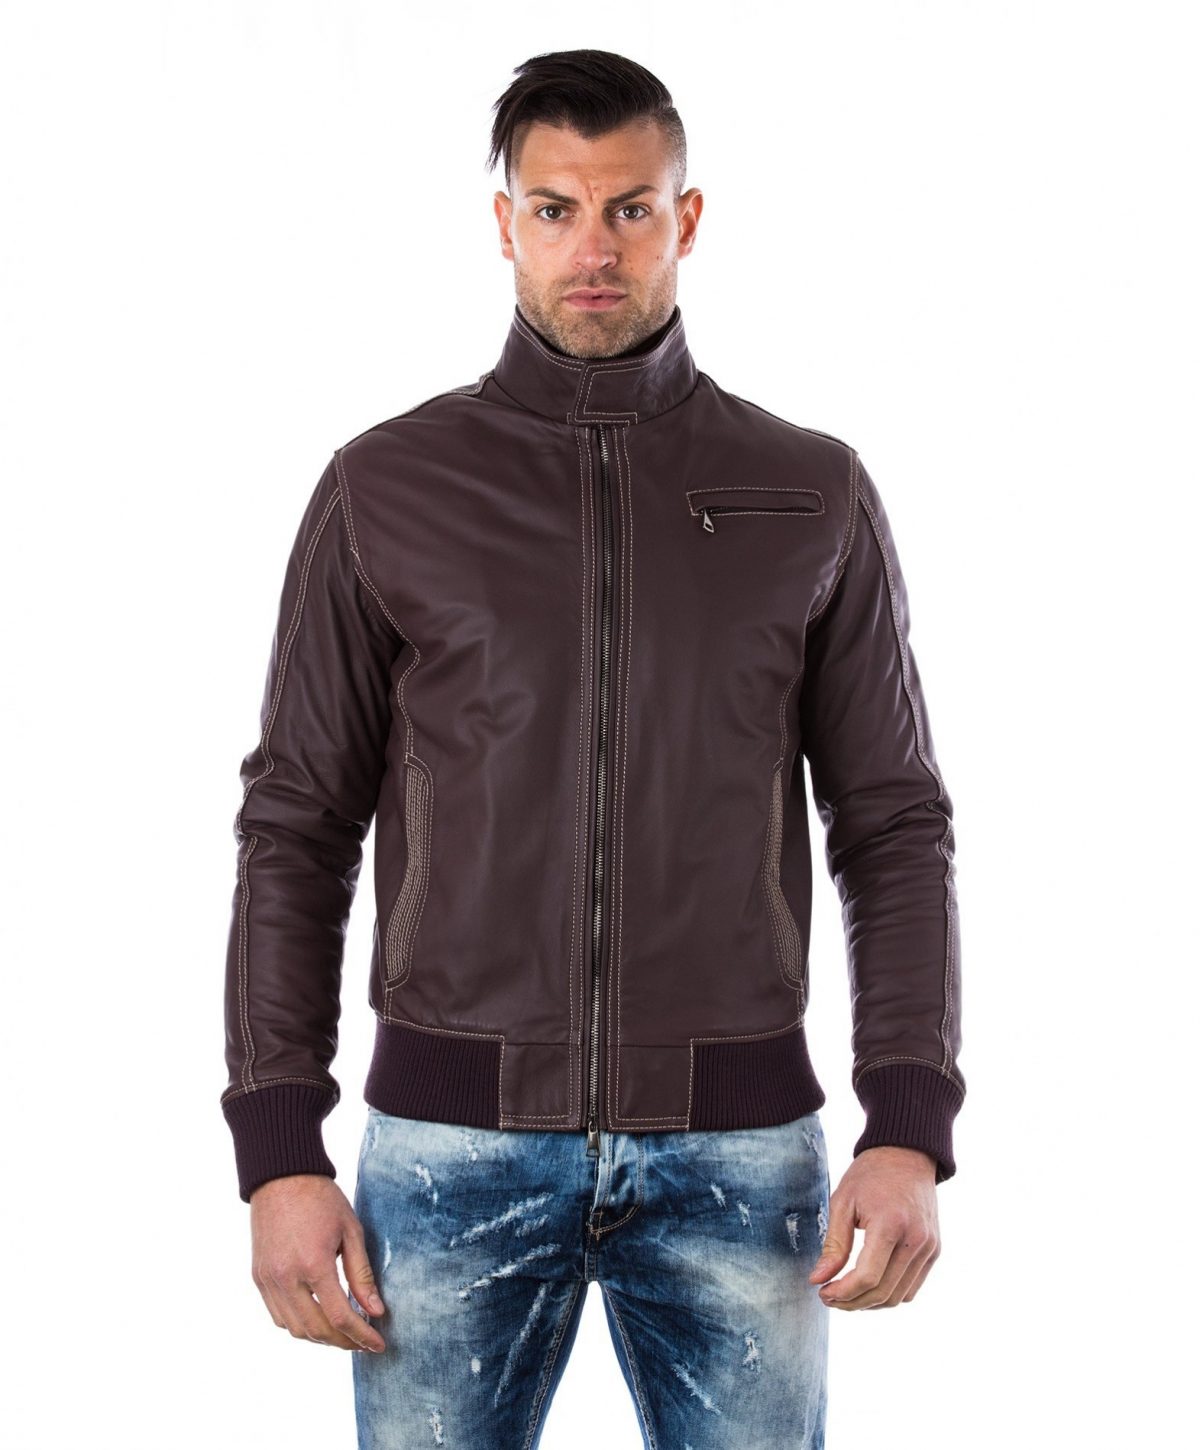 Brown Lamb Leather Bomber Jacket